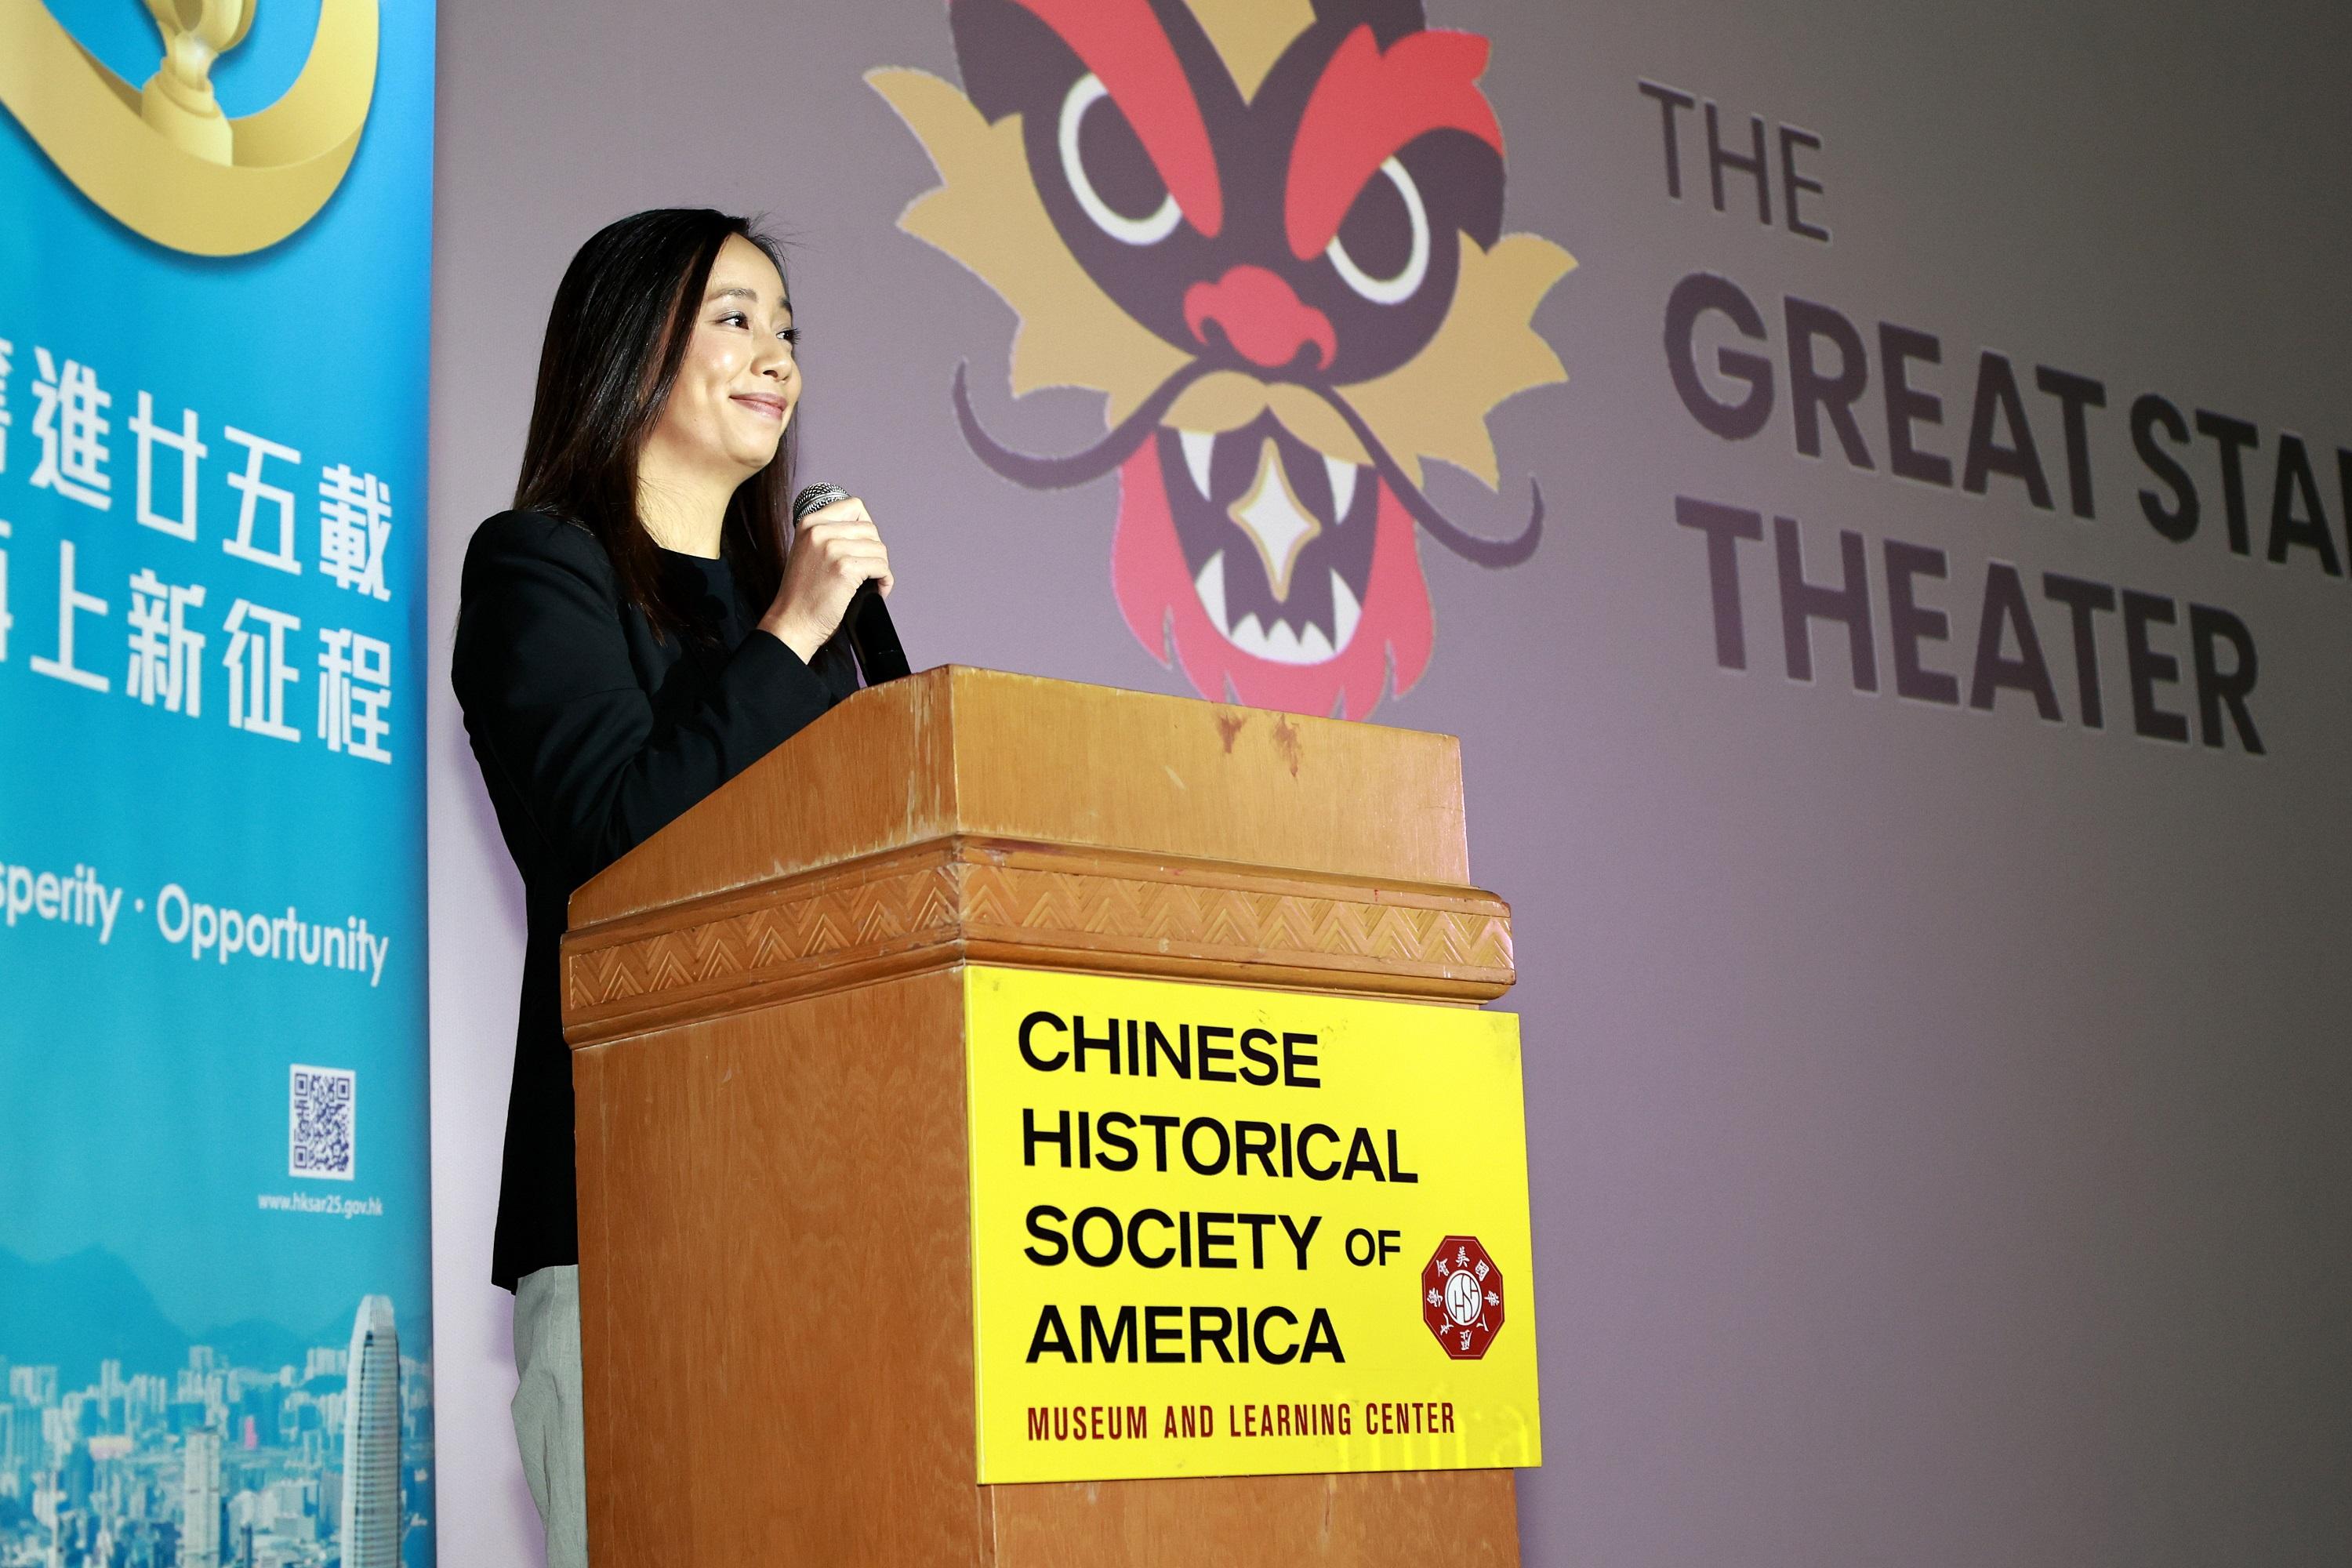 The Hong Kong Economic and Trade Office in San Francisco (HKETO San Francisco) partnered with the Chinese Historical Society of America for a film series, "Radiating Bruce Lee: Cinema Under The Sky", in San Francisco. Photo shows the Director of HKETO San Francisco, Ms Jacko Tsang, delivering remarks before the screening of "The Way of the Dragon" on November 27 (San Francisco time).